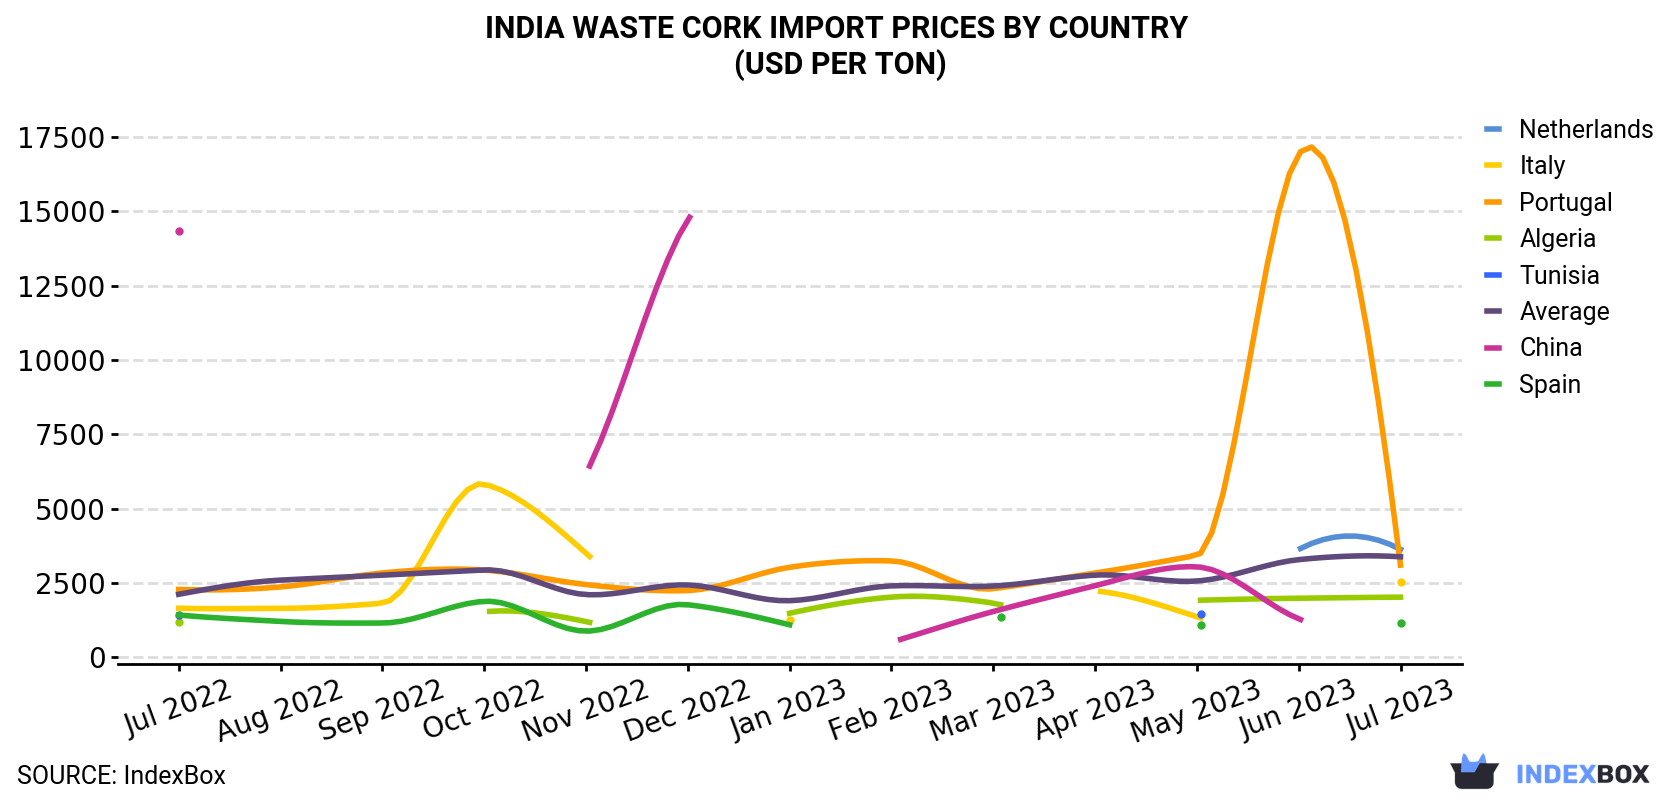 India Waste Cork Import Prices By Country (USD Per Ton)